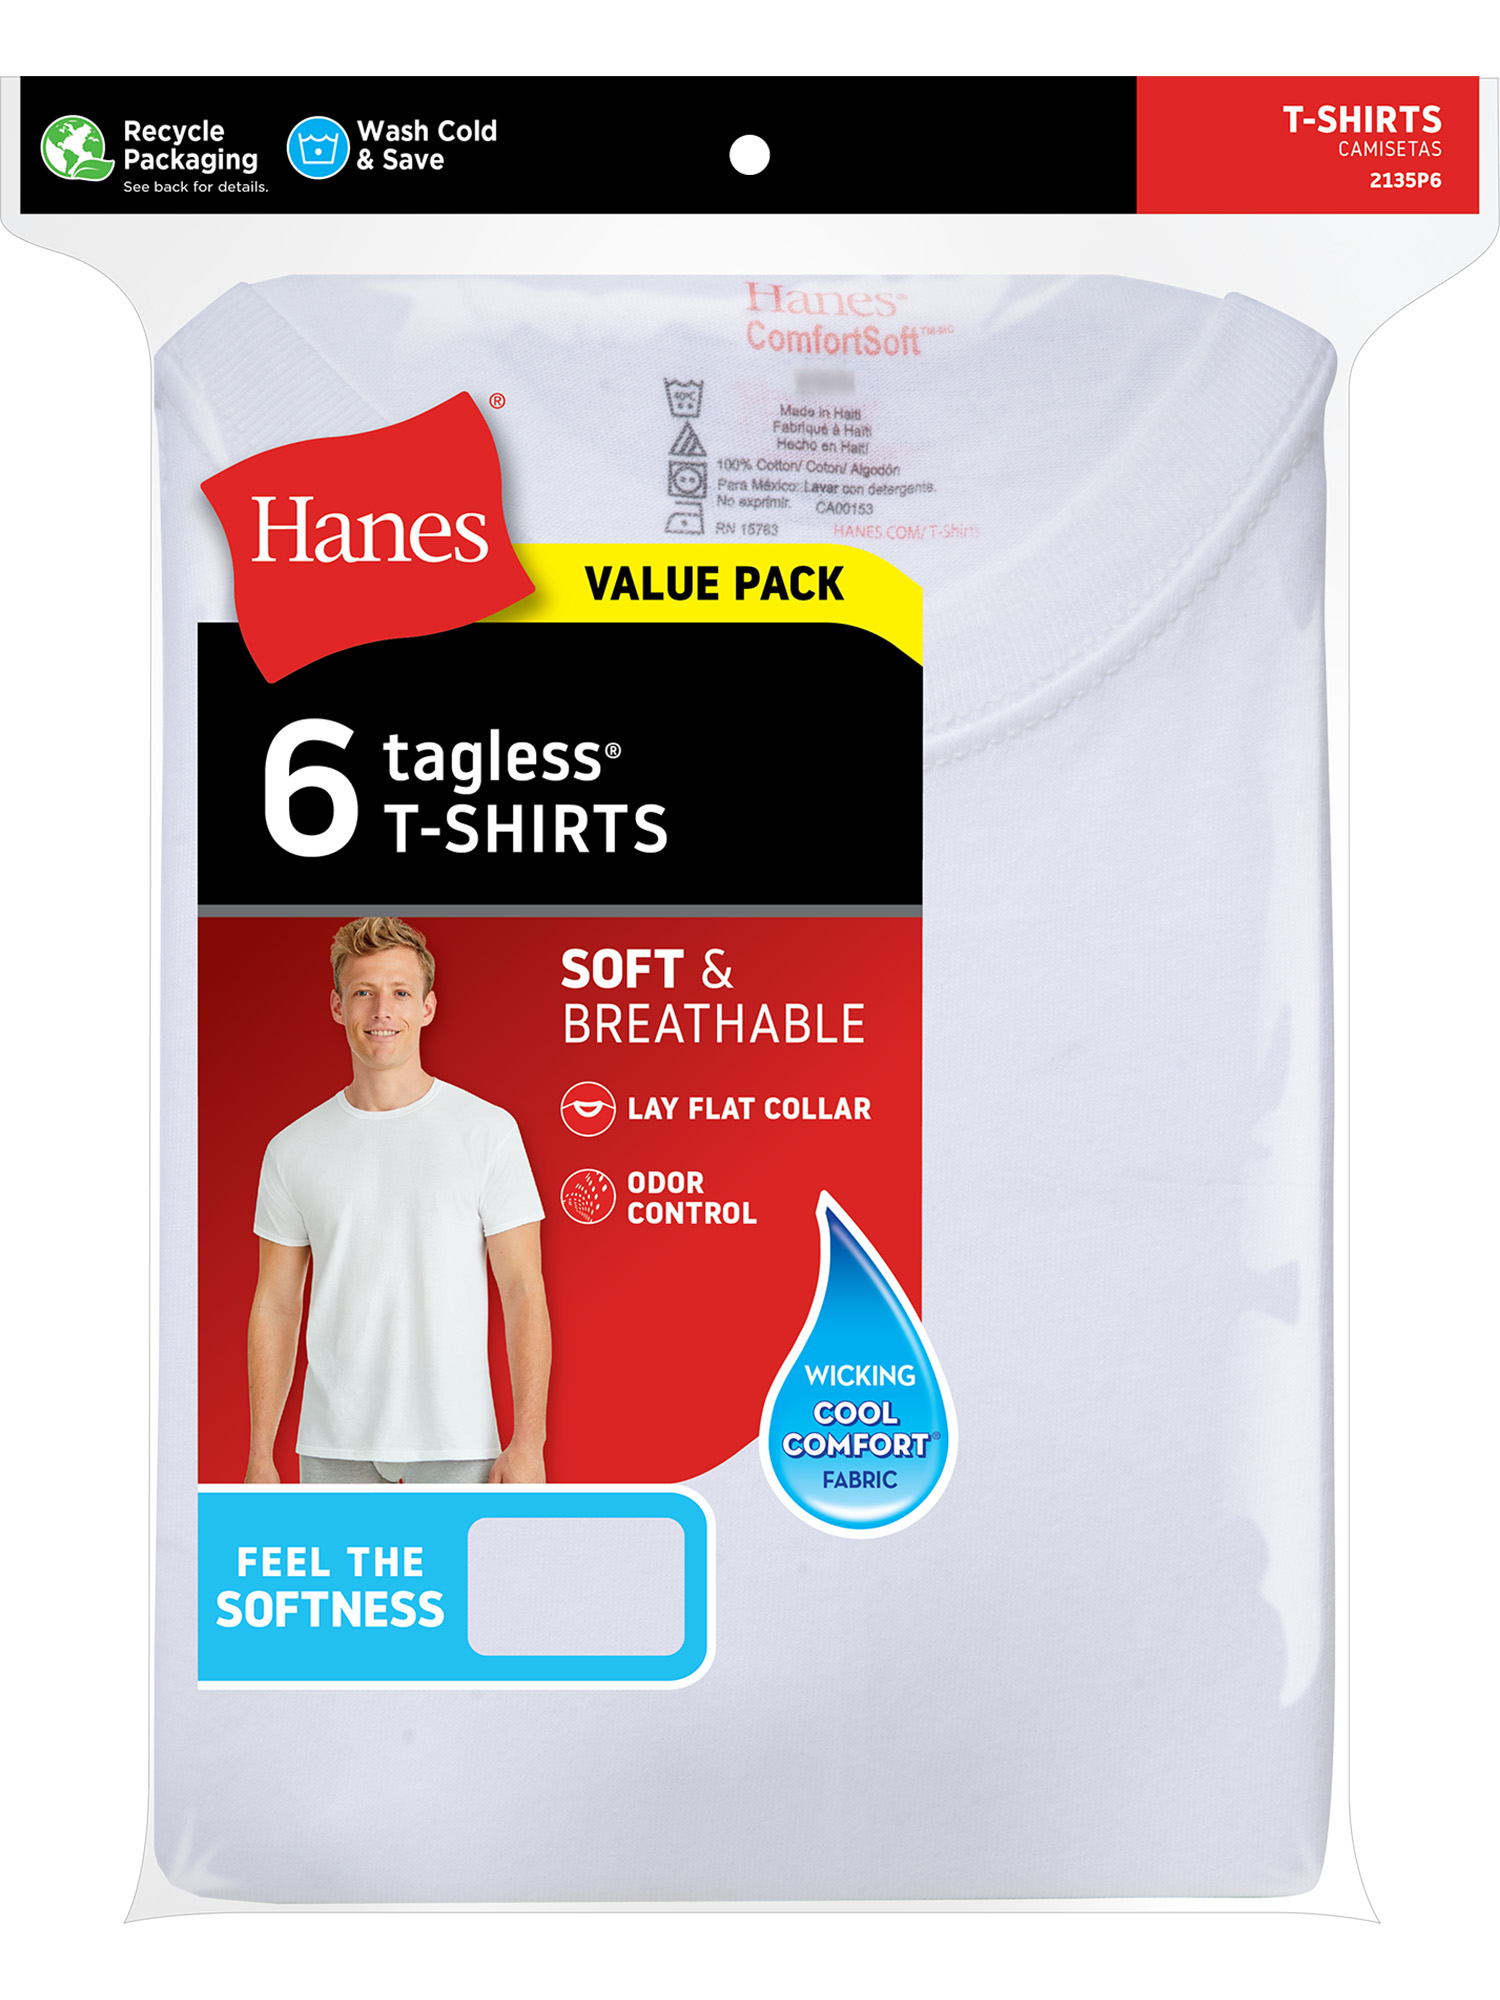 Hanes Men's Value Pack White Crew T-Shirt Undershirts, 6 Pack - image 3 of 10